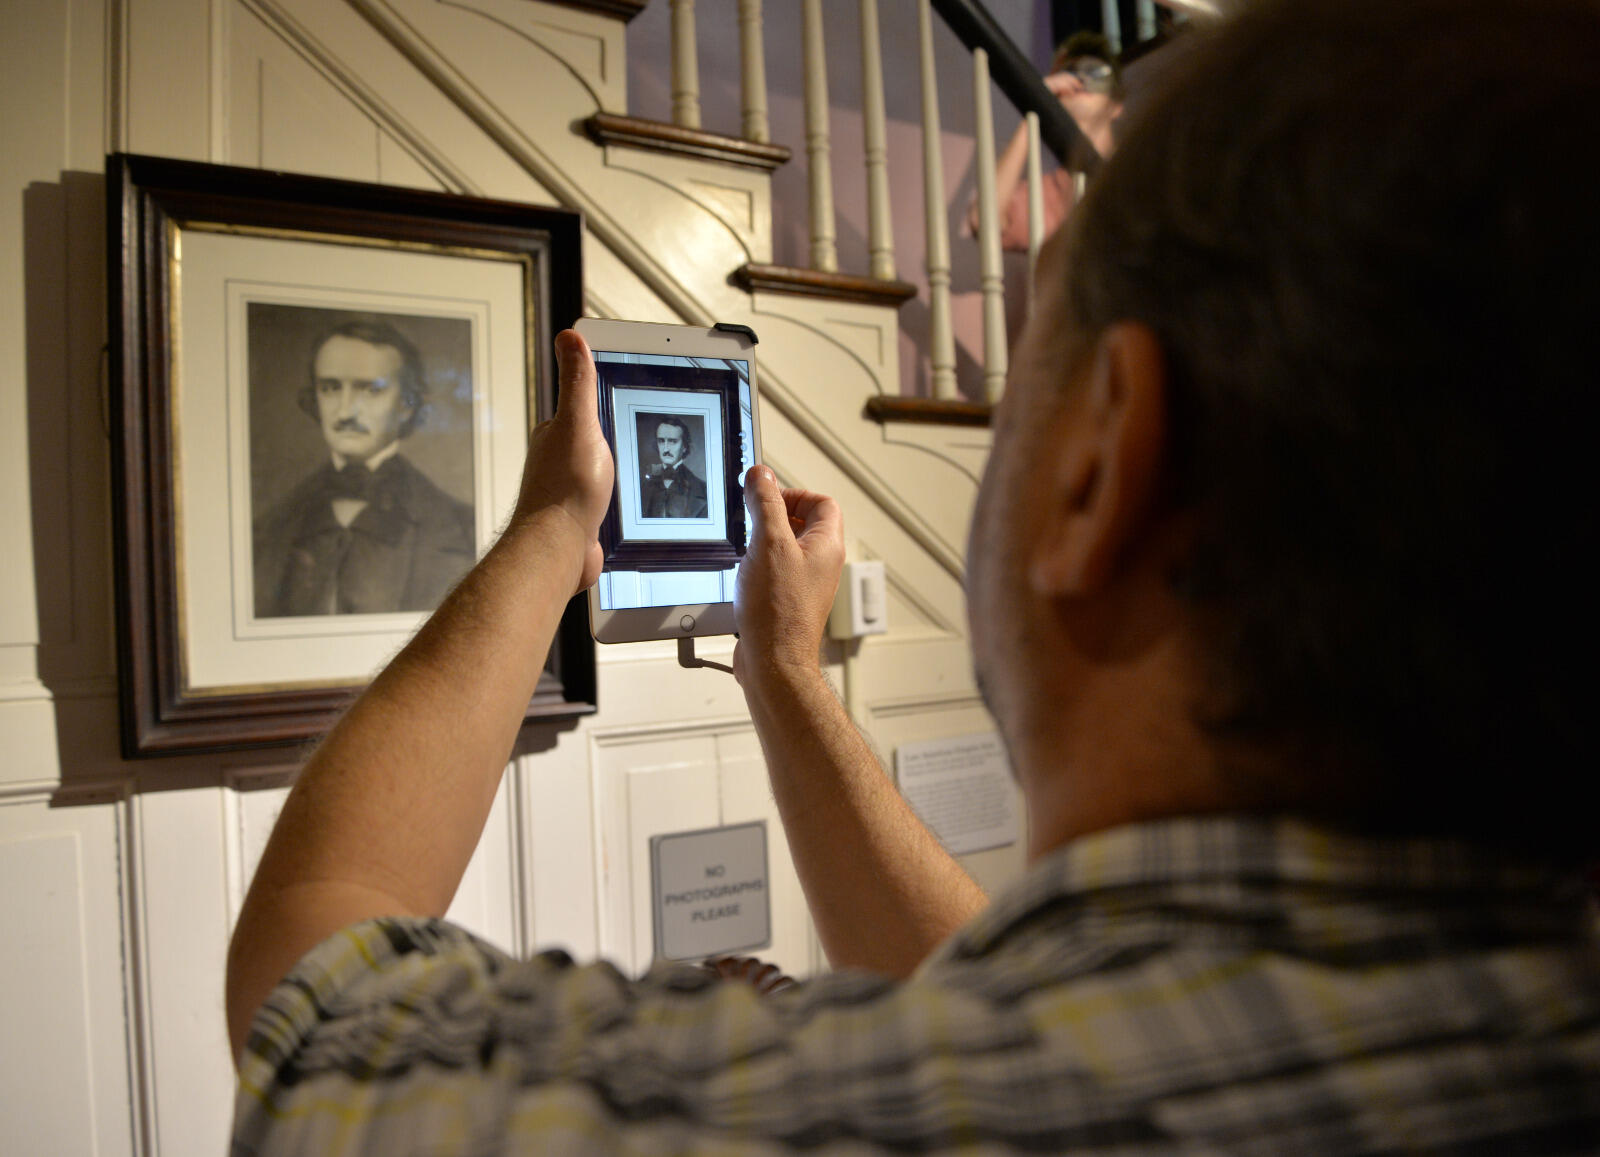 Means 3-D scans a portrait of Poe to create a digital animation.
